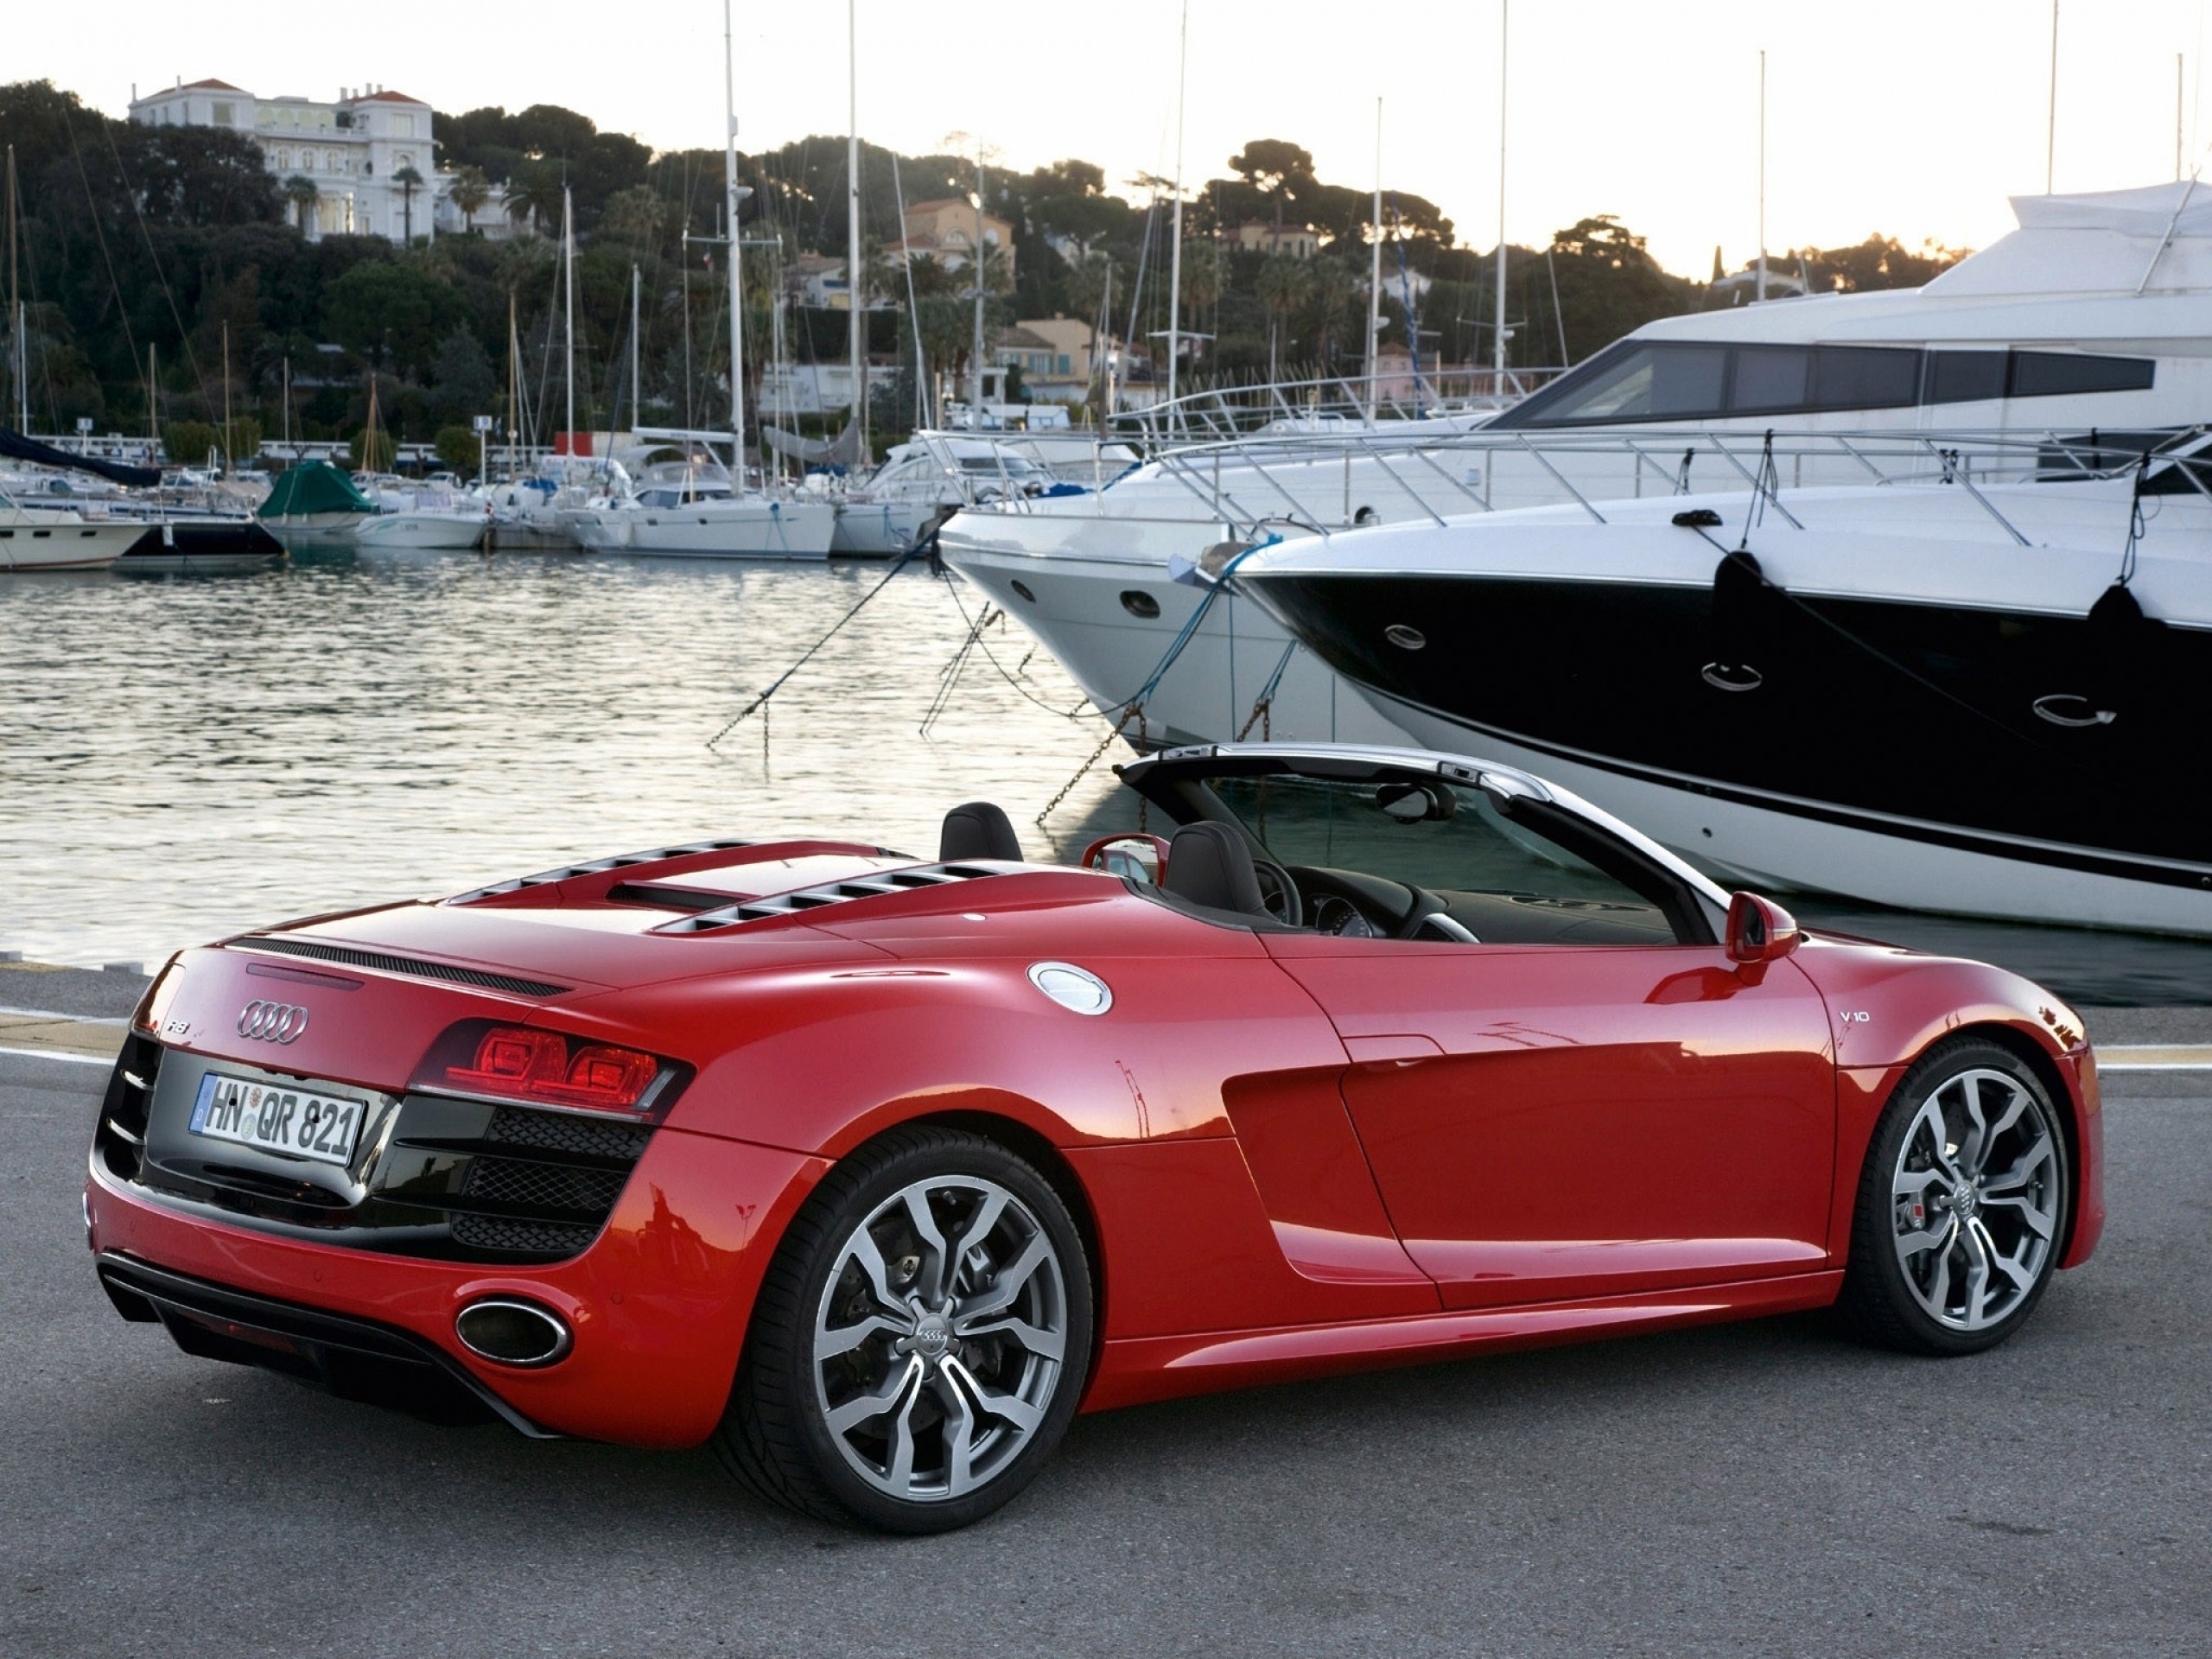 65585 download wallpaper audi, cars, red, cabriolet, r8, spyder screensavers and pictures for free